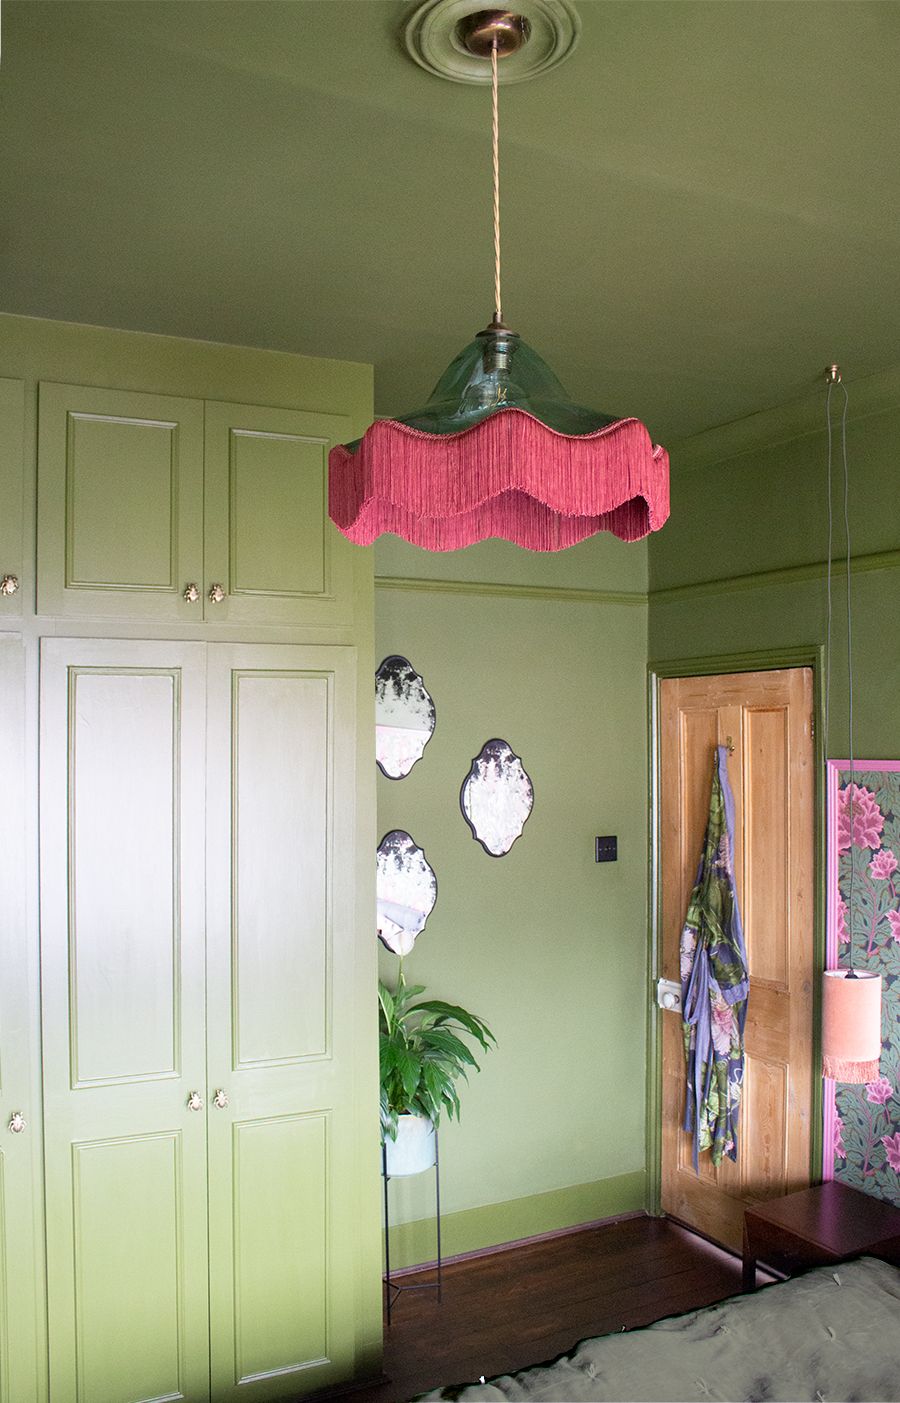 The fringed glass lampshade in the main bedroom, against a backdrop of the Bancha green wardrobes.